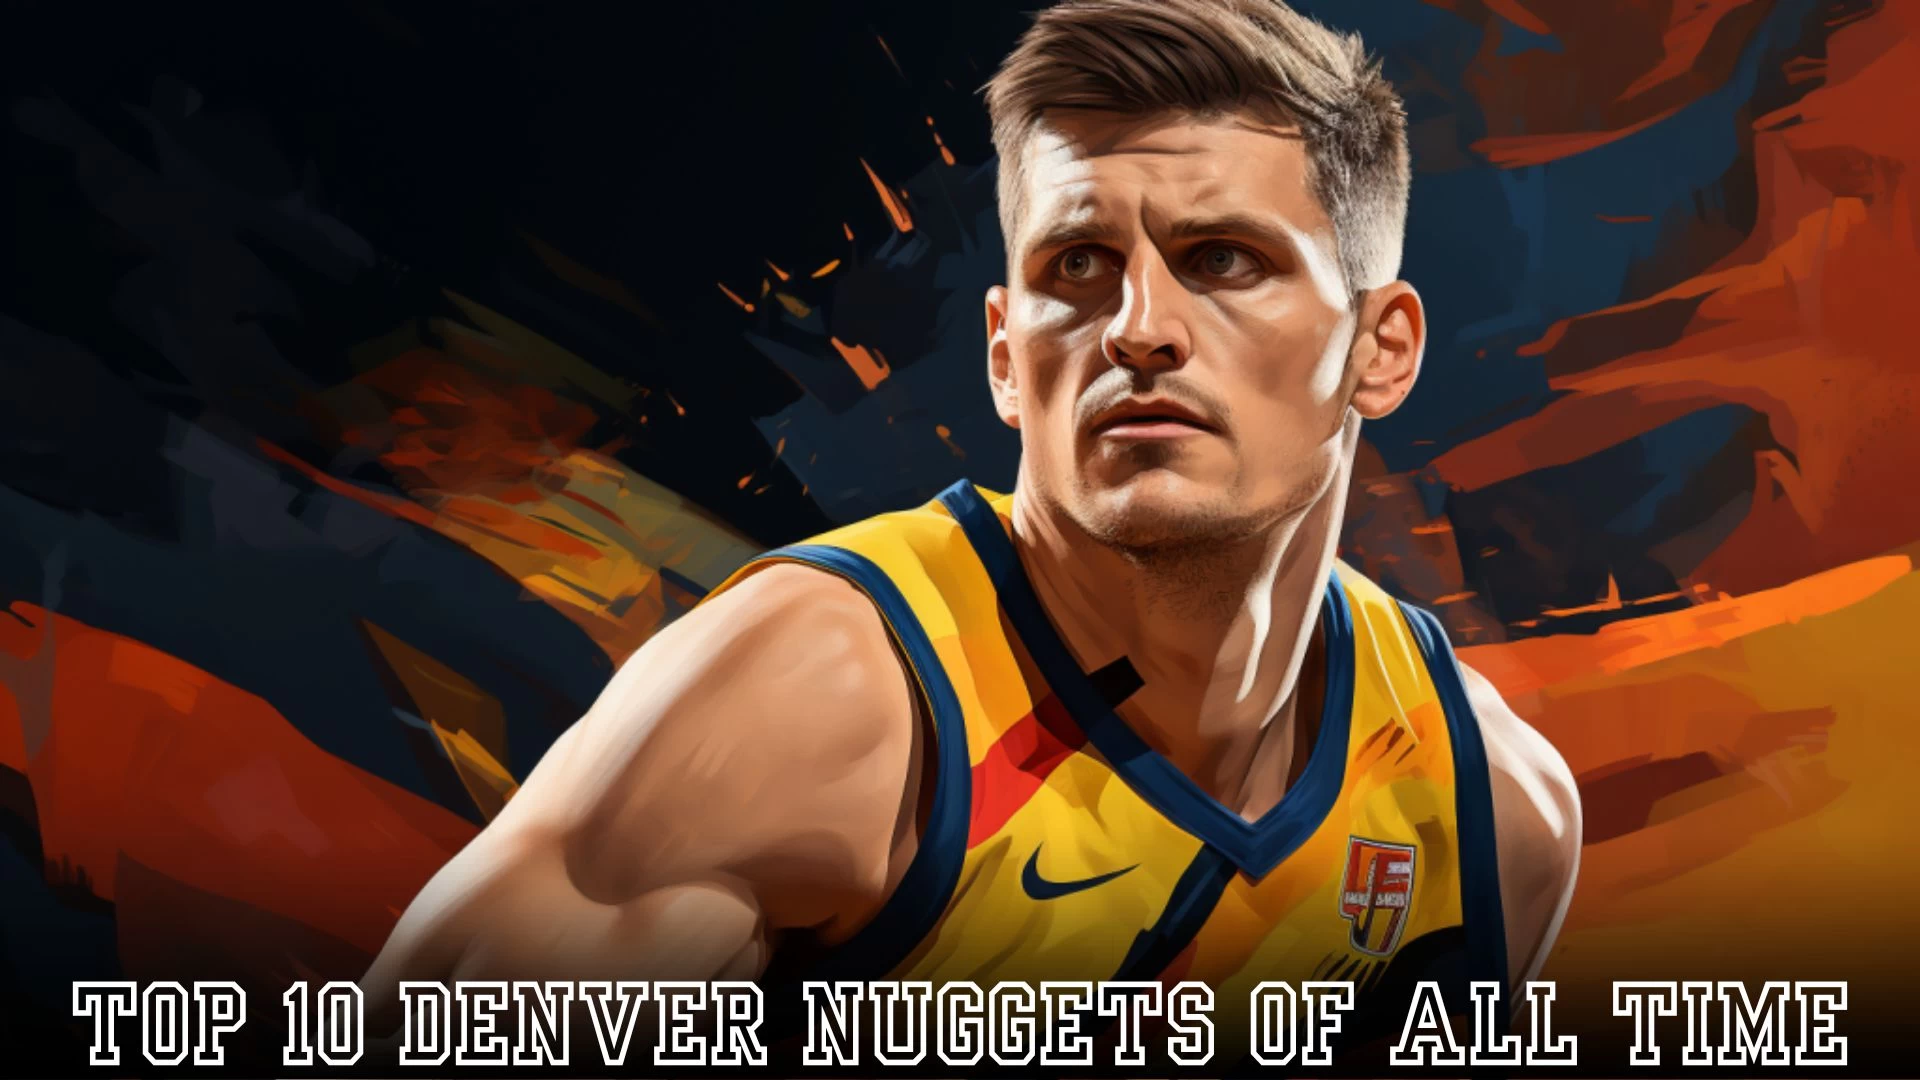 Top 10 Denver Nuggets of All Time - Discover the Legends of Basketball